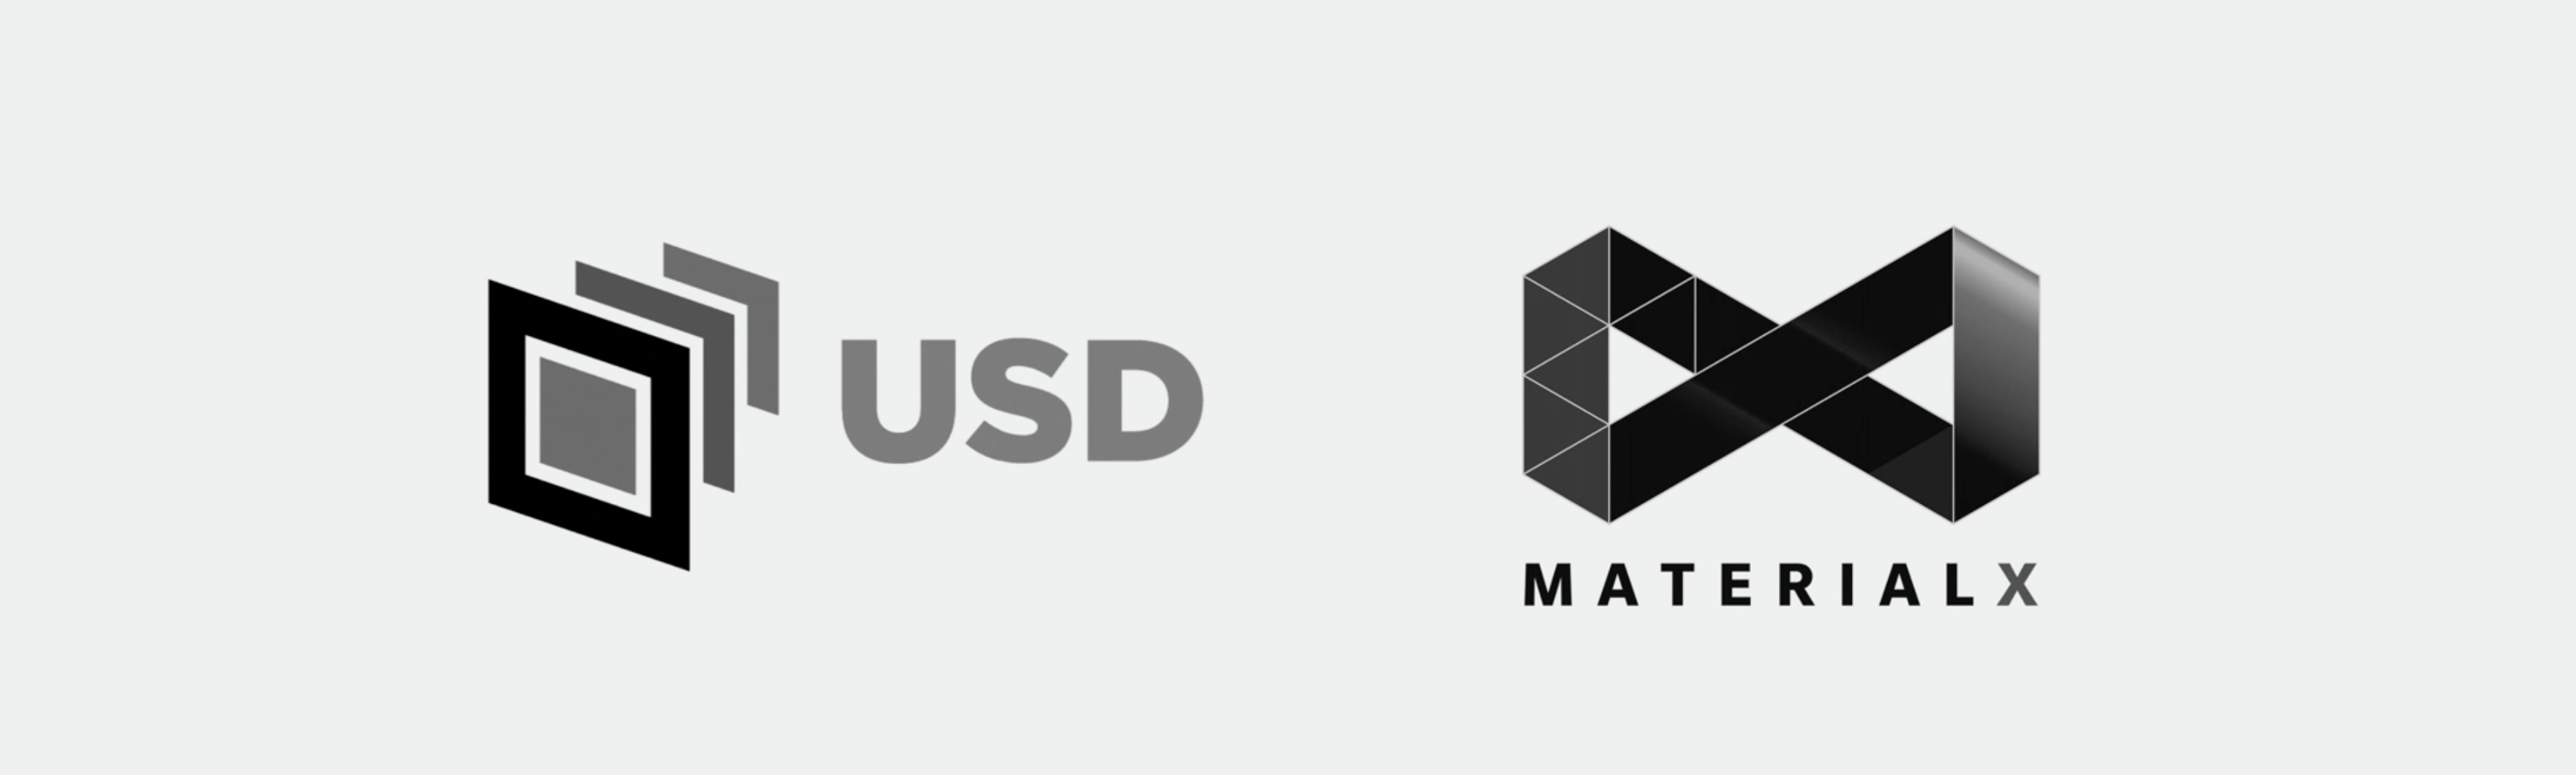 USD and MaterialX